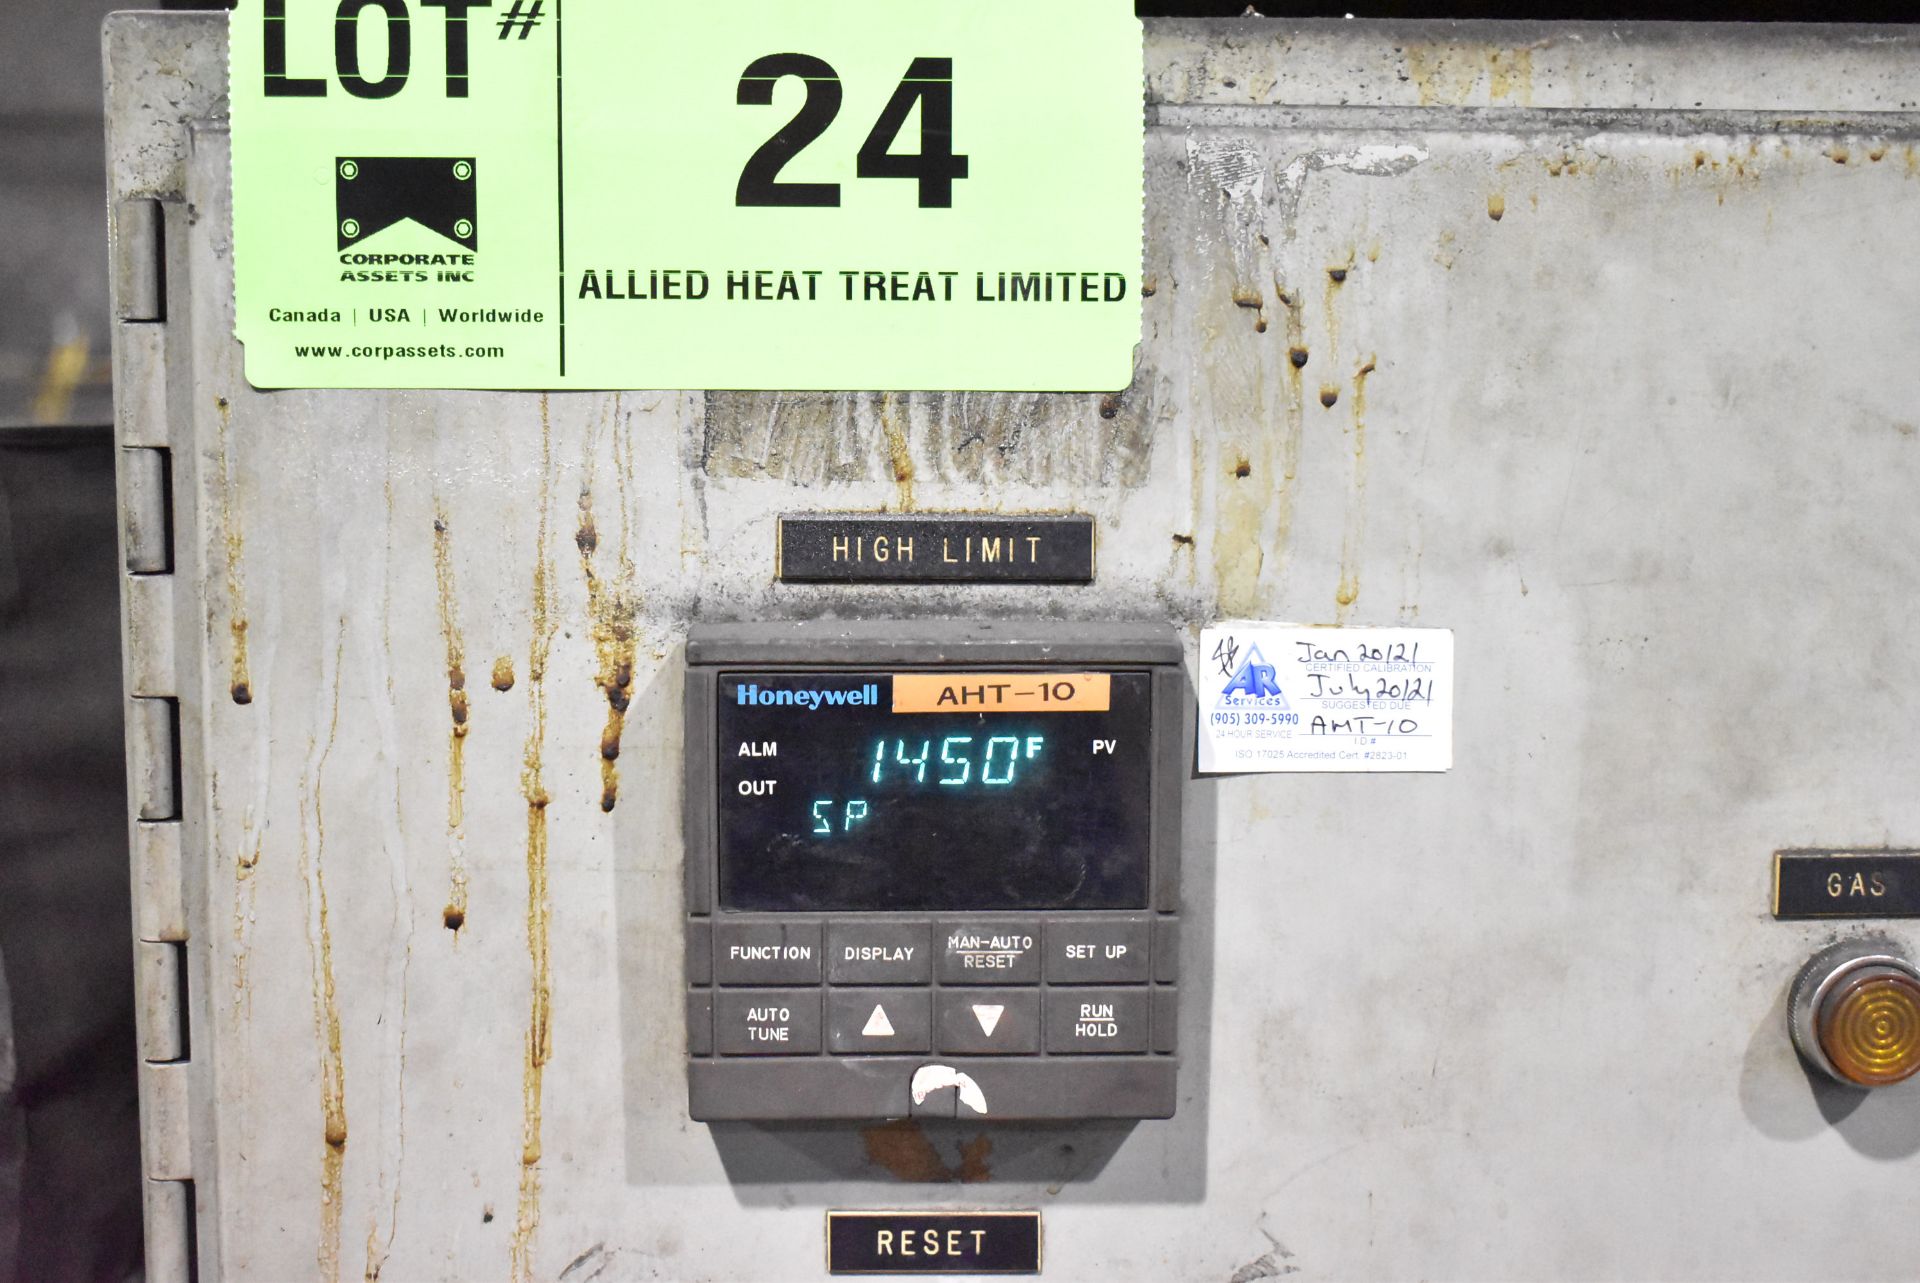 PYRADIA FH 415923 TC ELECTRIC TEMPER FURNACE WITH SYSCON REX C-900 DIGITAL TEMPERATURE CONTROLLER, - Image 8 of 14